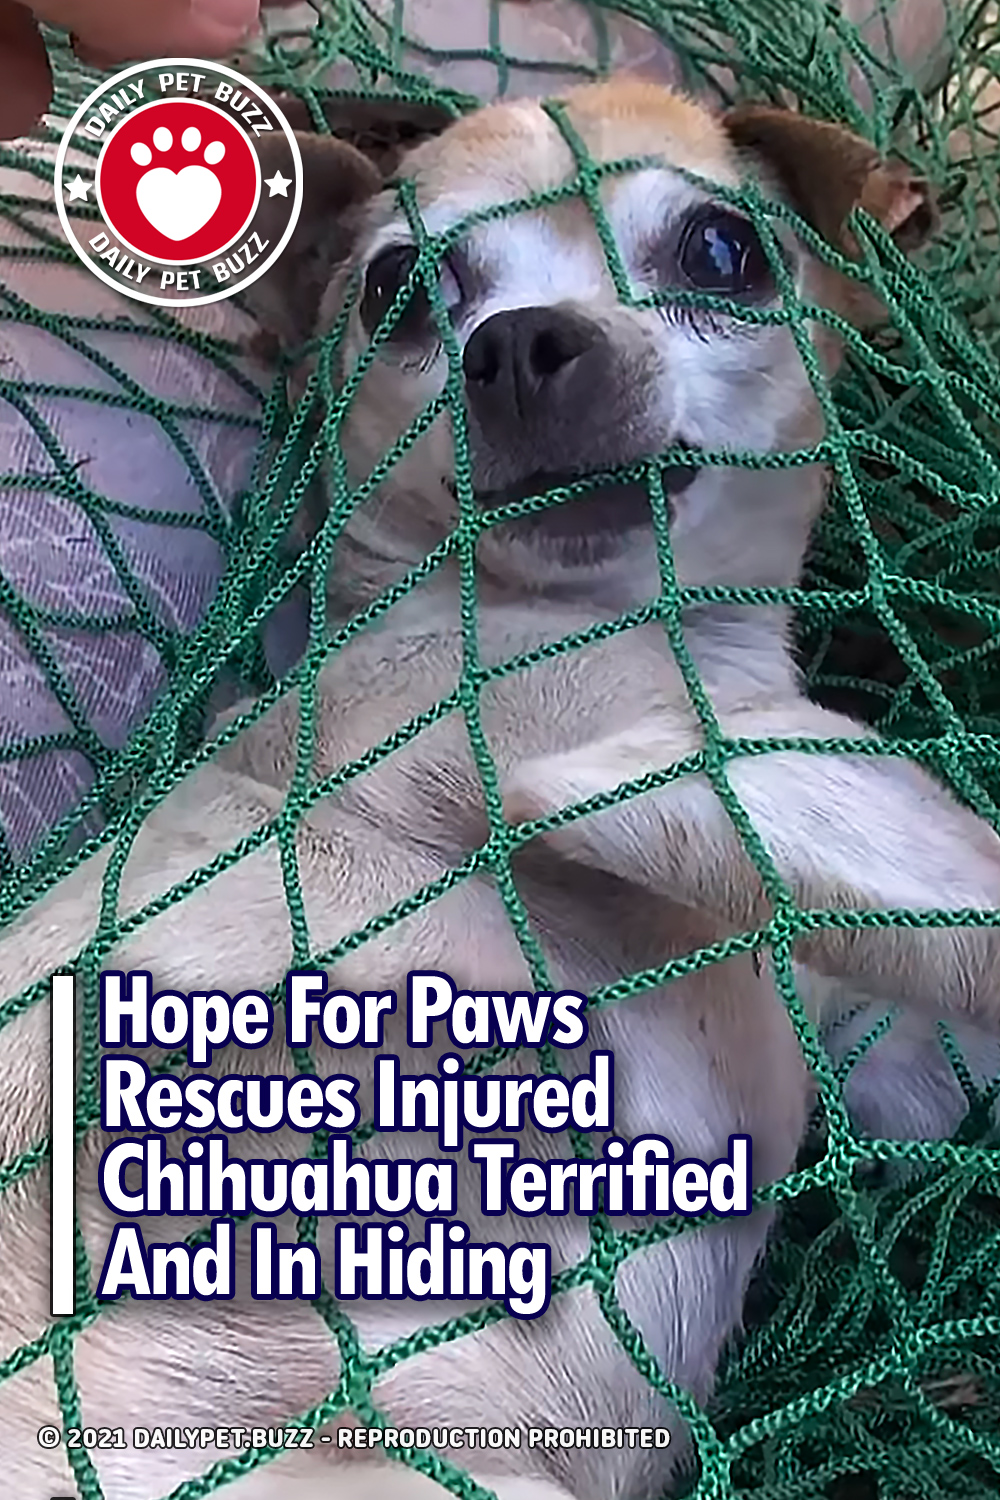 Hope For Paws Rescues Injured Chihuahua Terrified And In Hiding